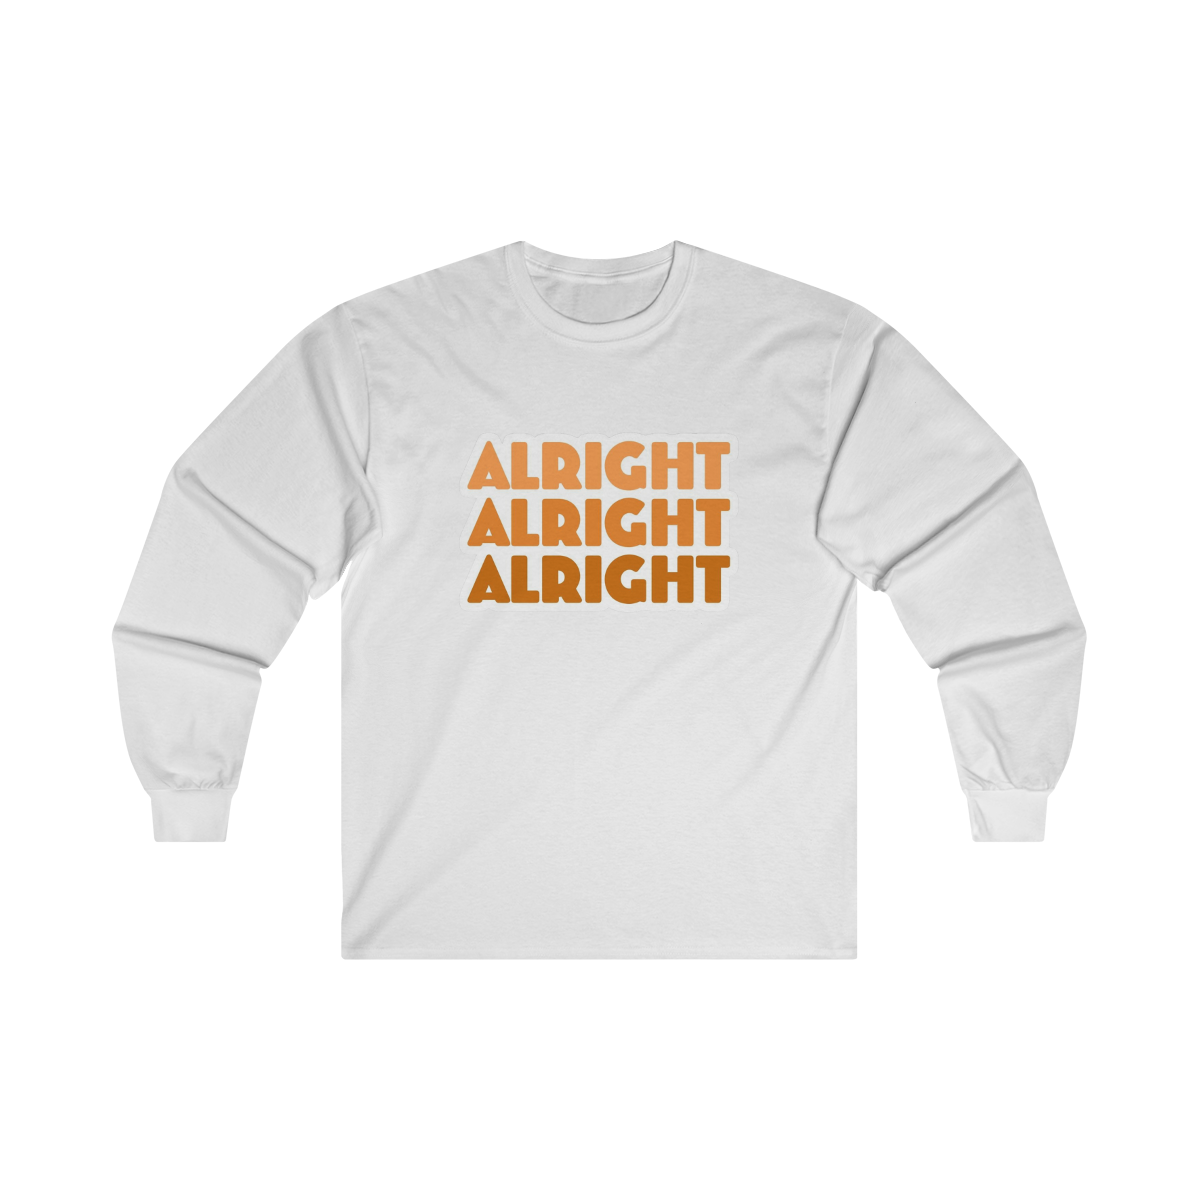 Alright Alright Alright.Ultra Cotton Long Sleeve Tee